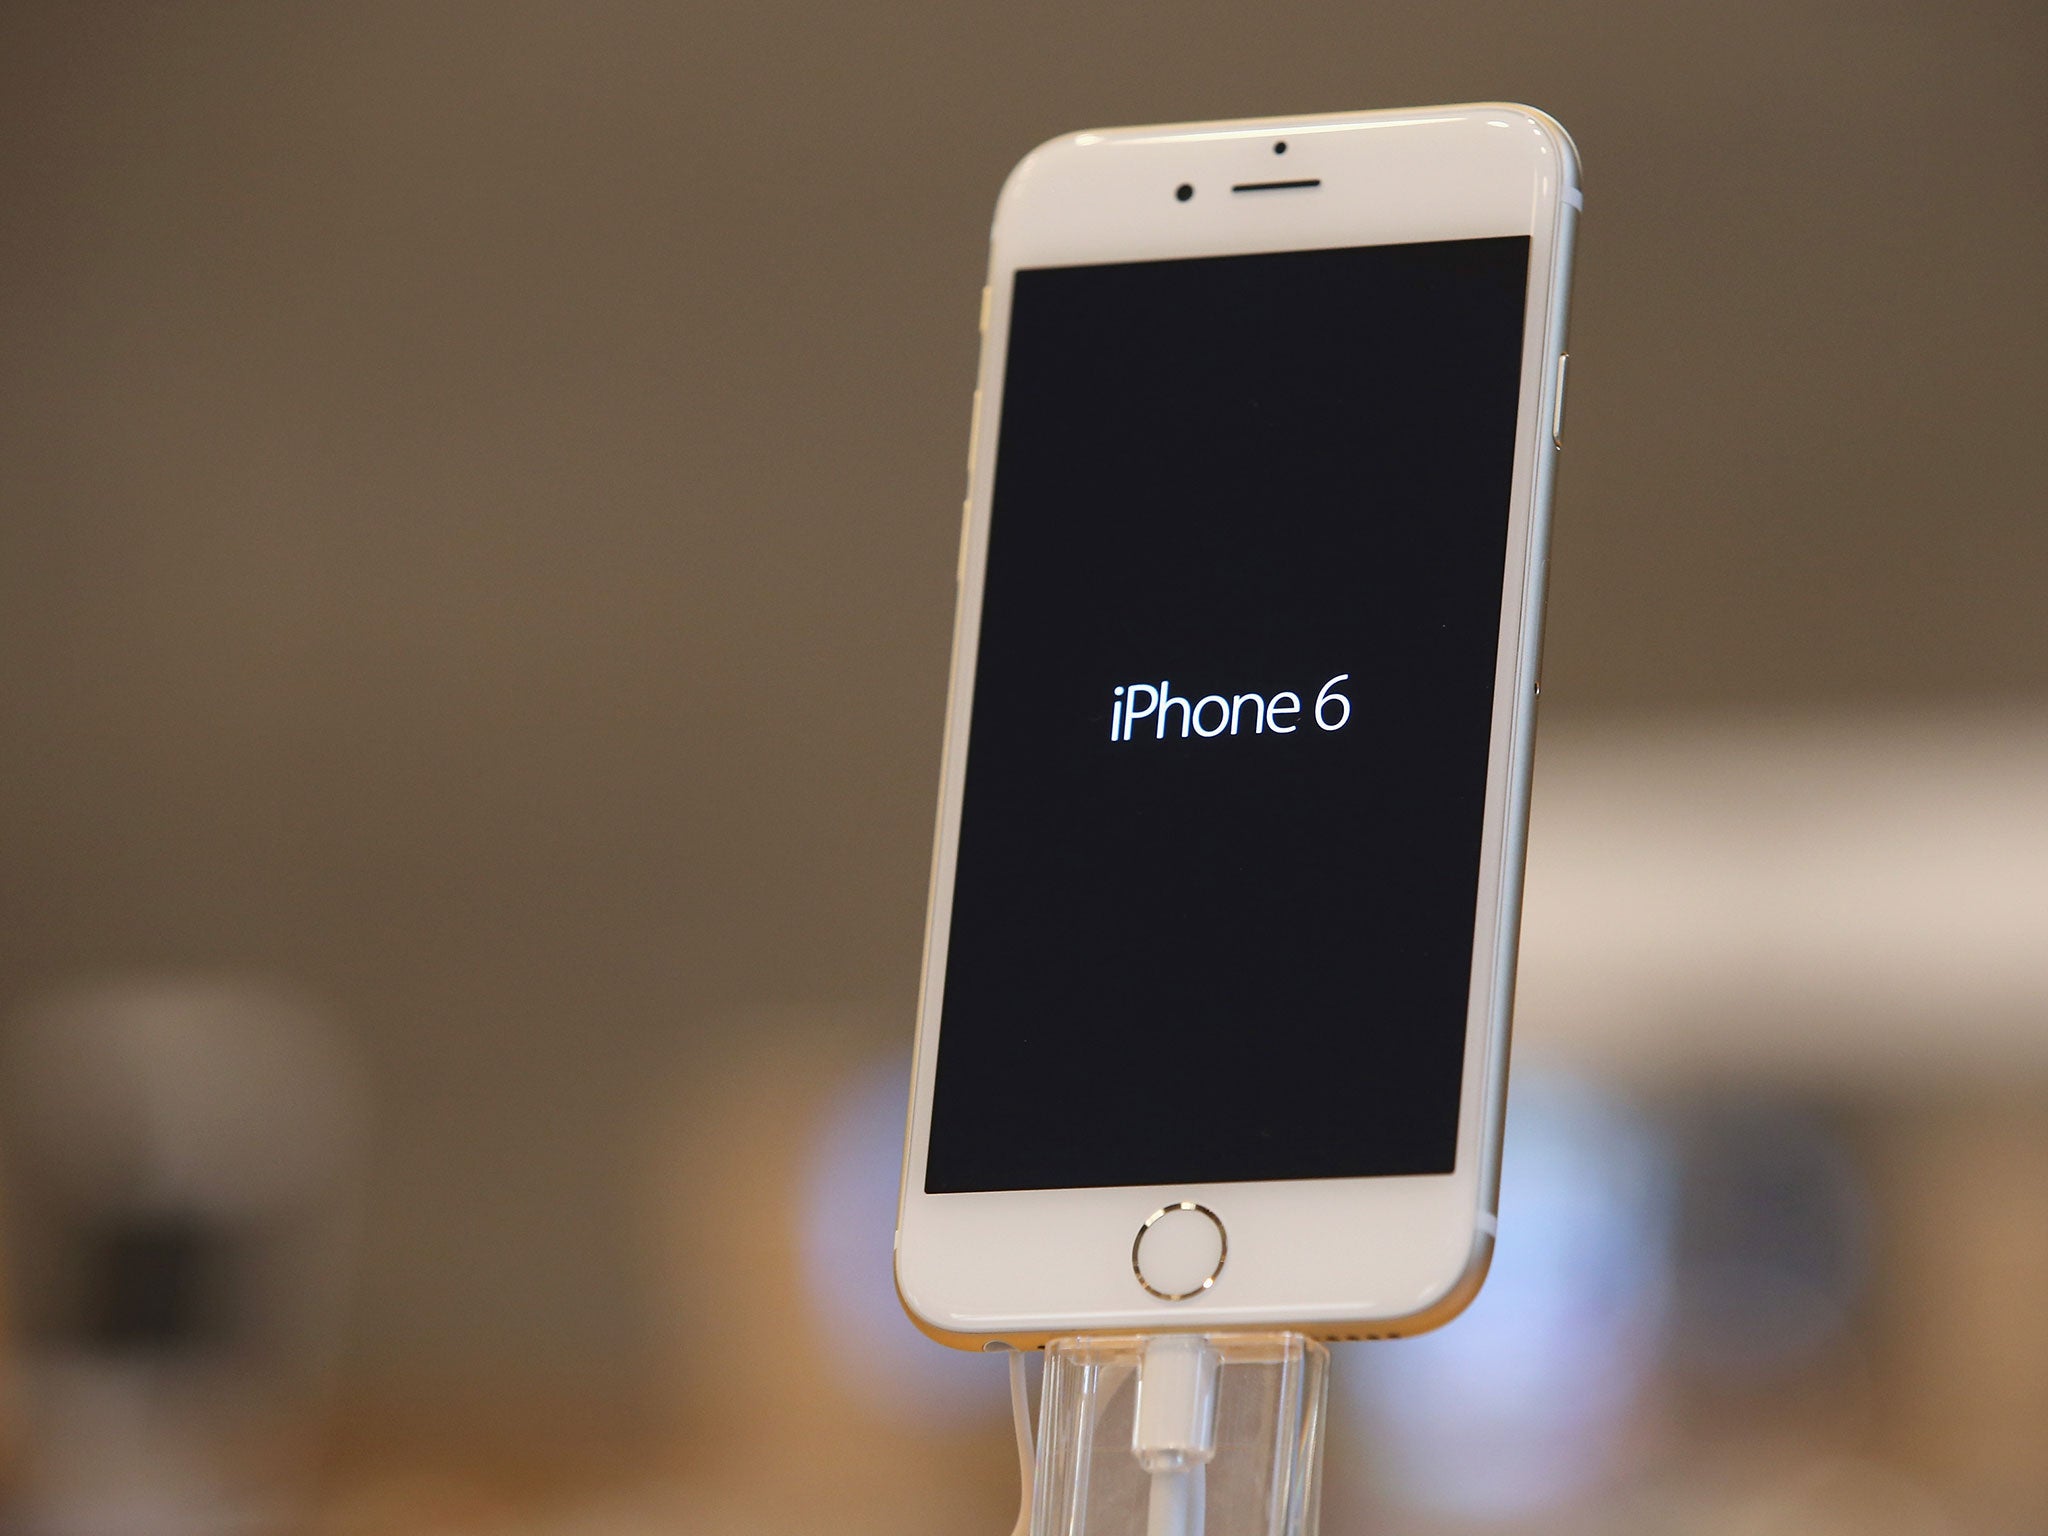 An Apple iPhone 6 stands on display at the Apple Store